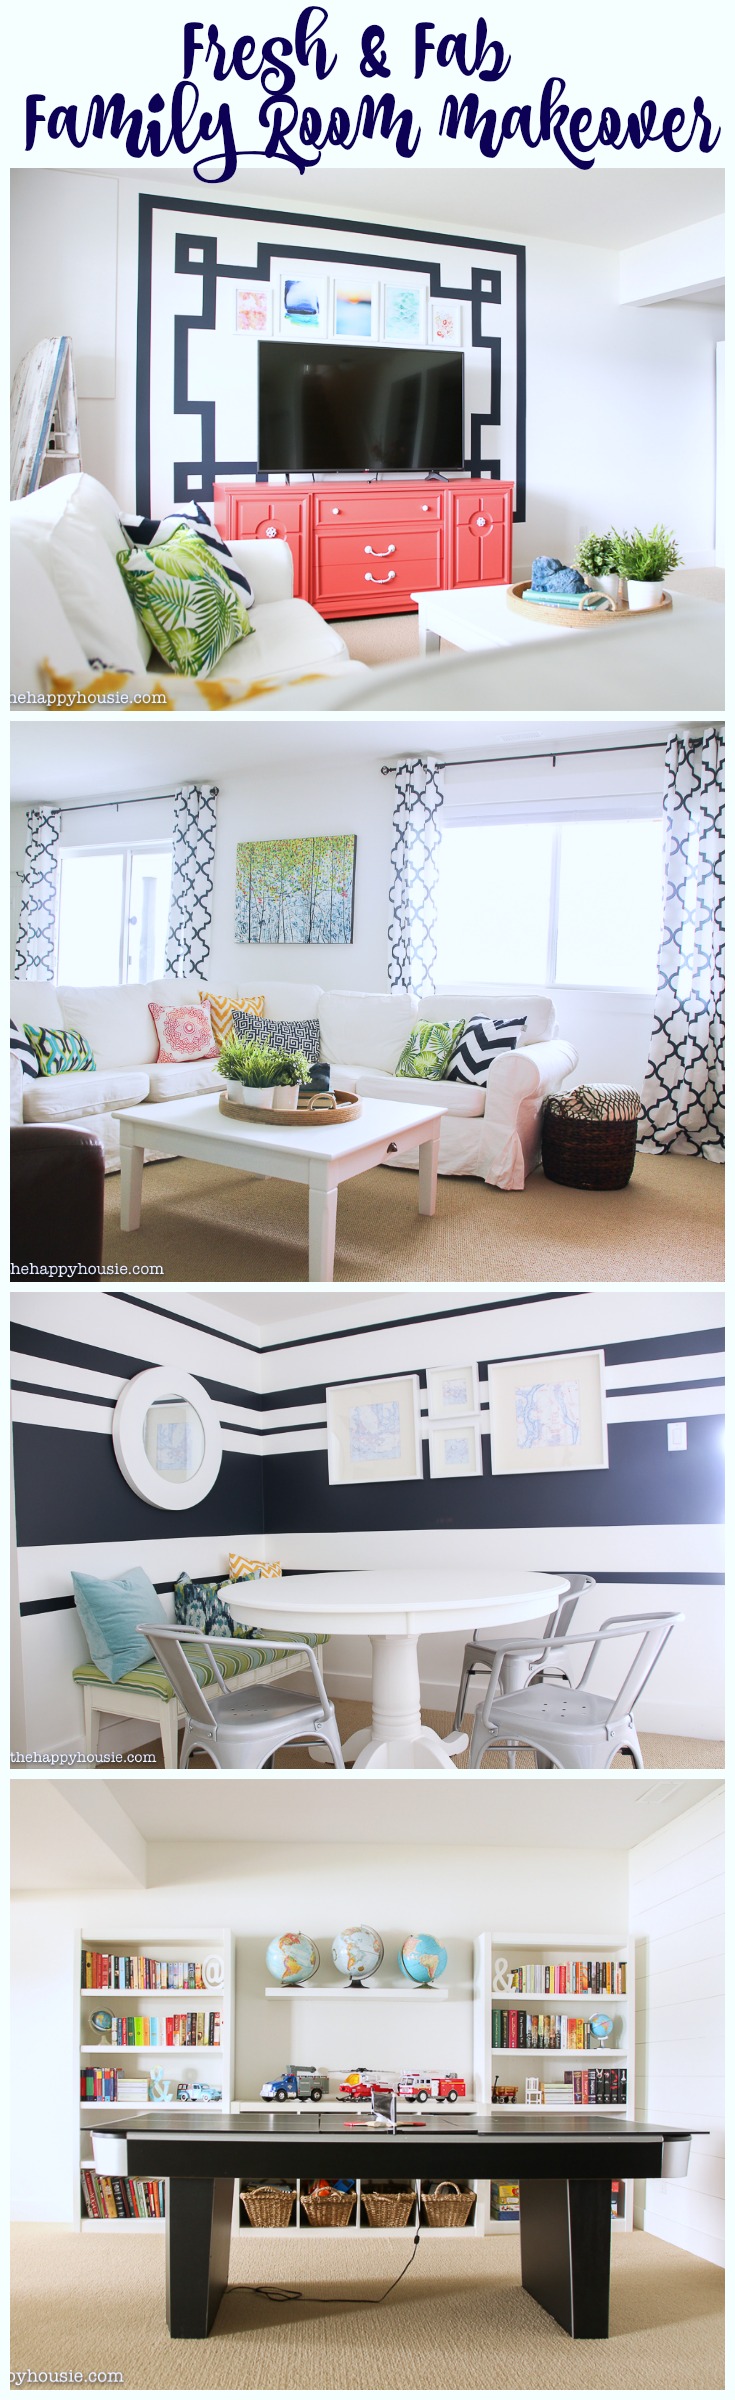 Fresh & Fab Family Room Makeover Revea for the FrogTape Paintover Challenge at the happy housie